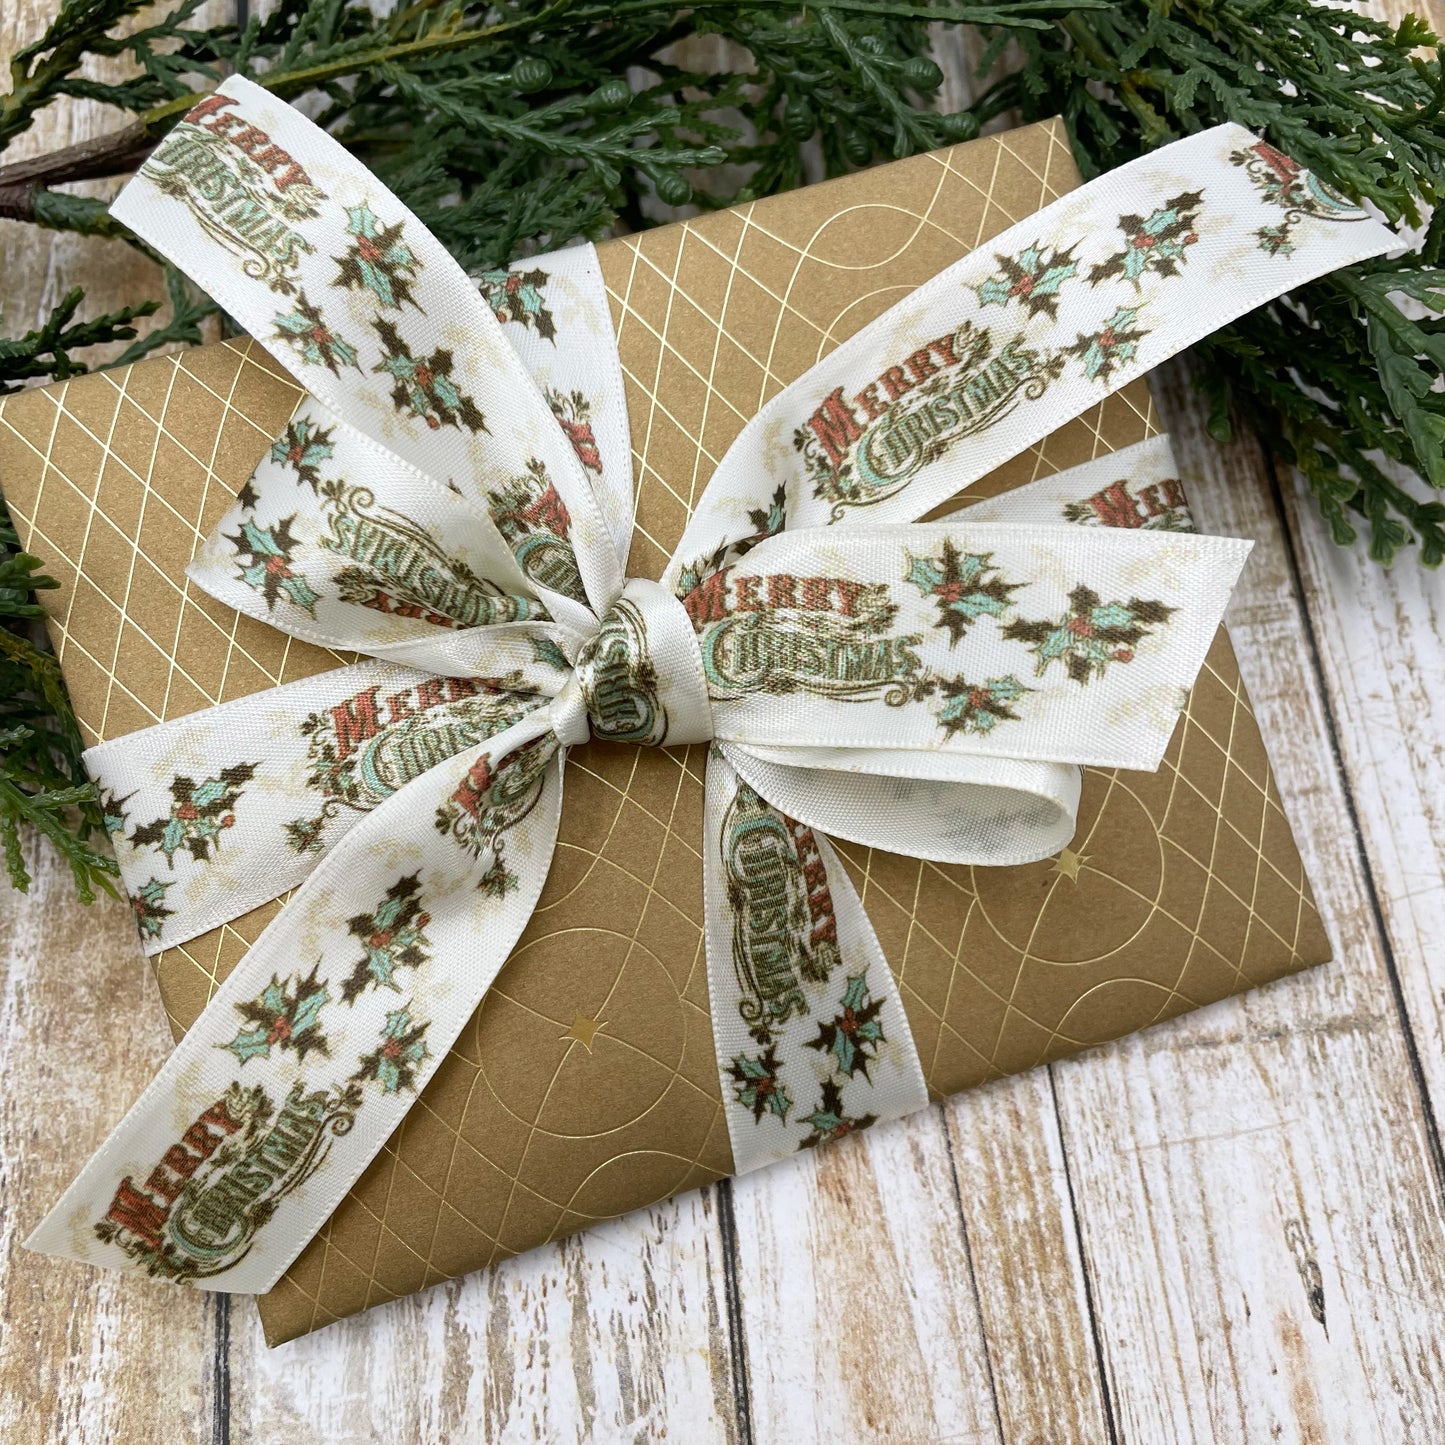 Vintage Christmas Ribbon Merry Christmas in Victorian style with holly leaves and berries printed on 7/8" antique white satin